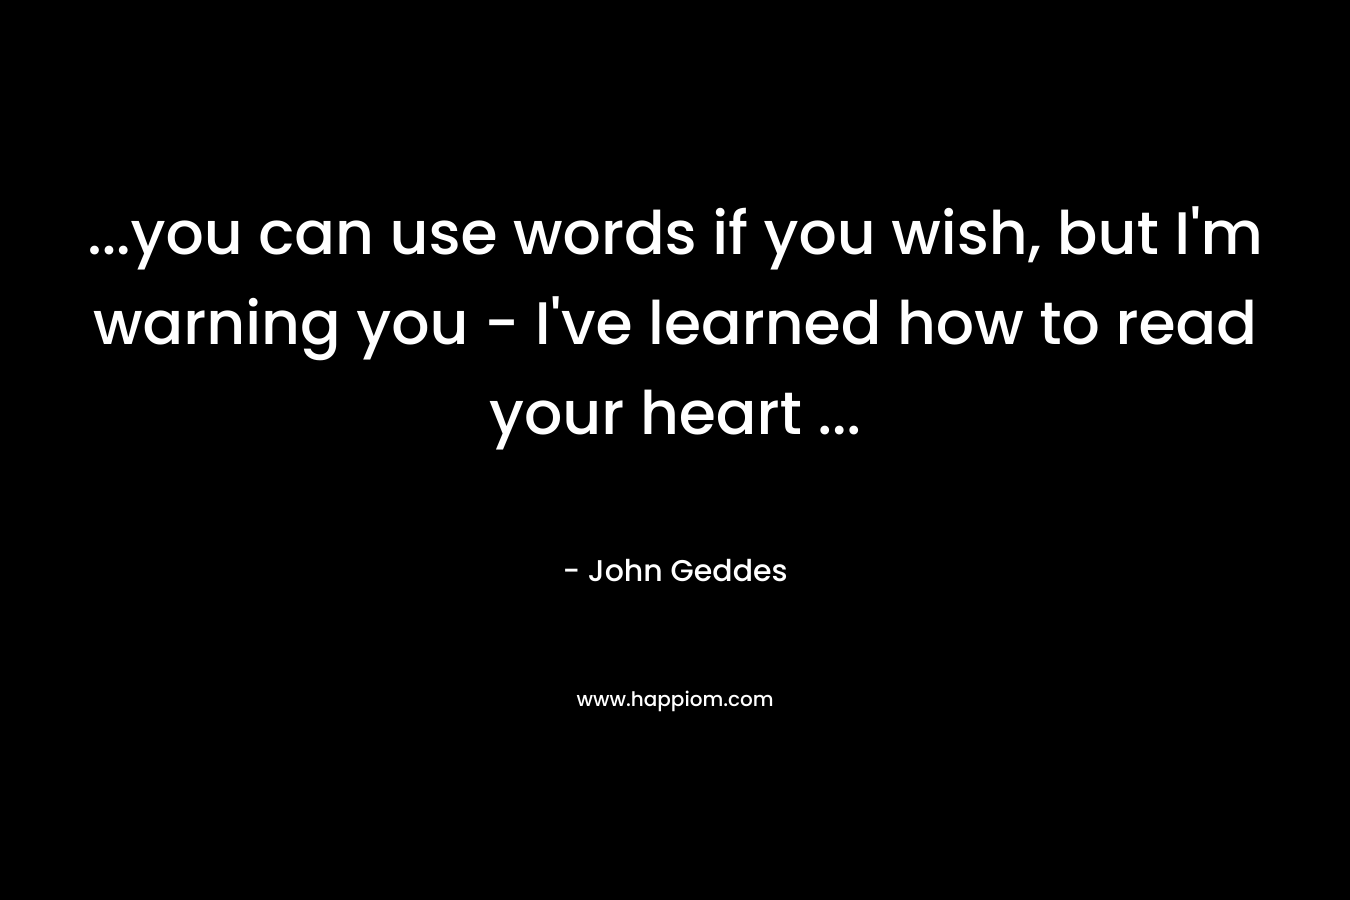 ...you can use words if you wish, but I'm warning you - I've learned how to read your heart ...